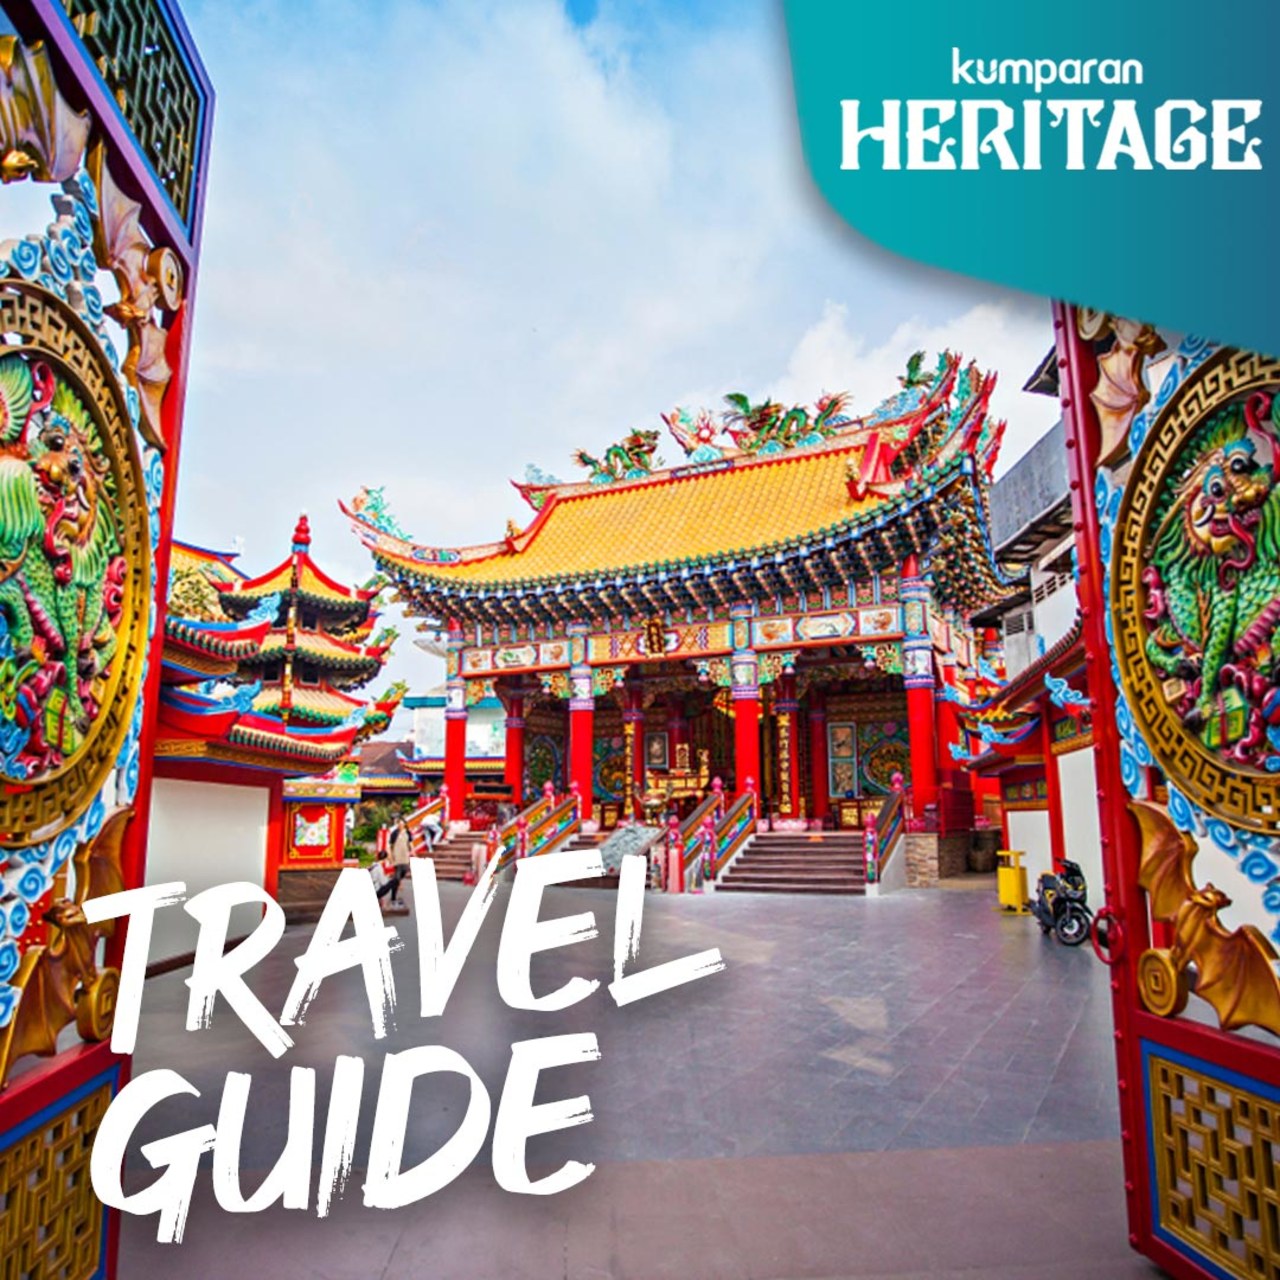 Heritage - Travel Guide